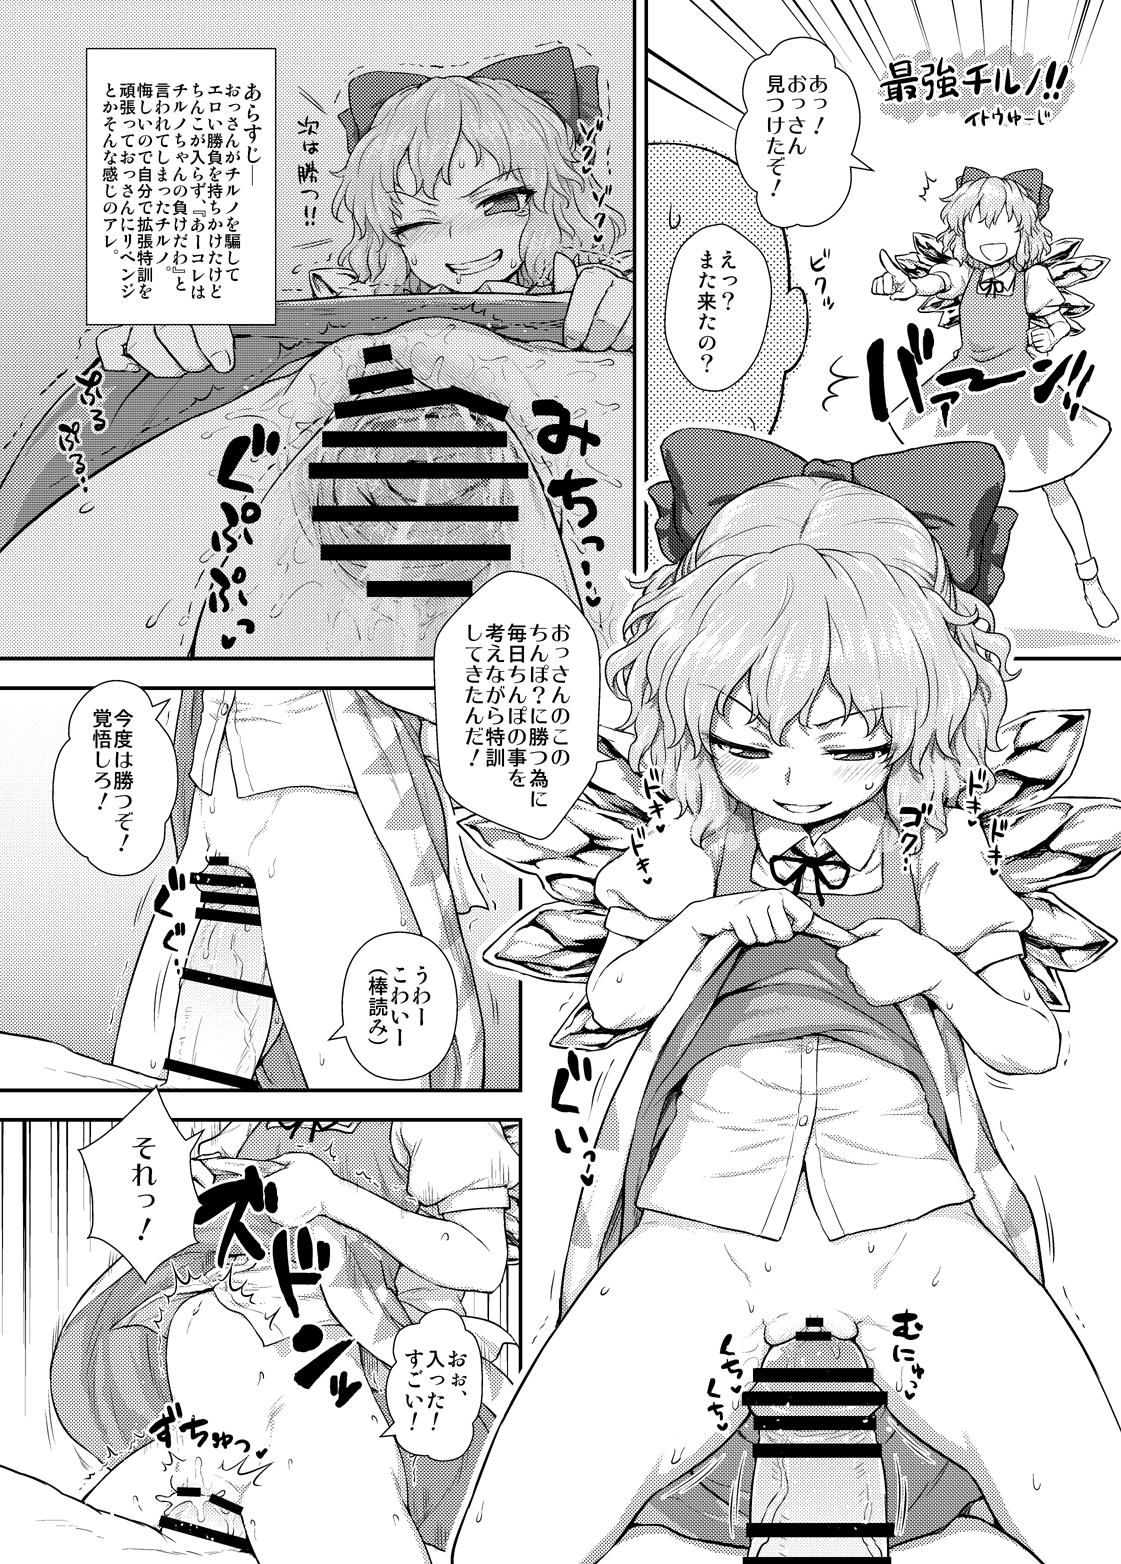 Oriental 『東方子宮脱合同誌』 - Touhou project Perfect Girl Porn - Picture 1